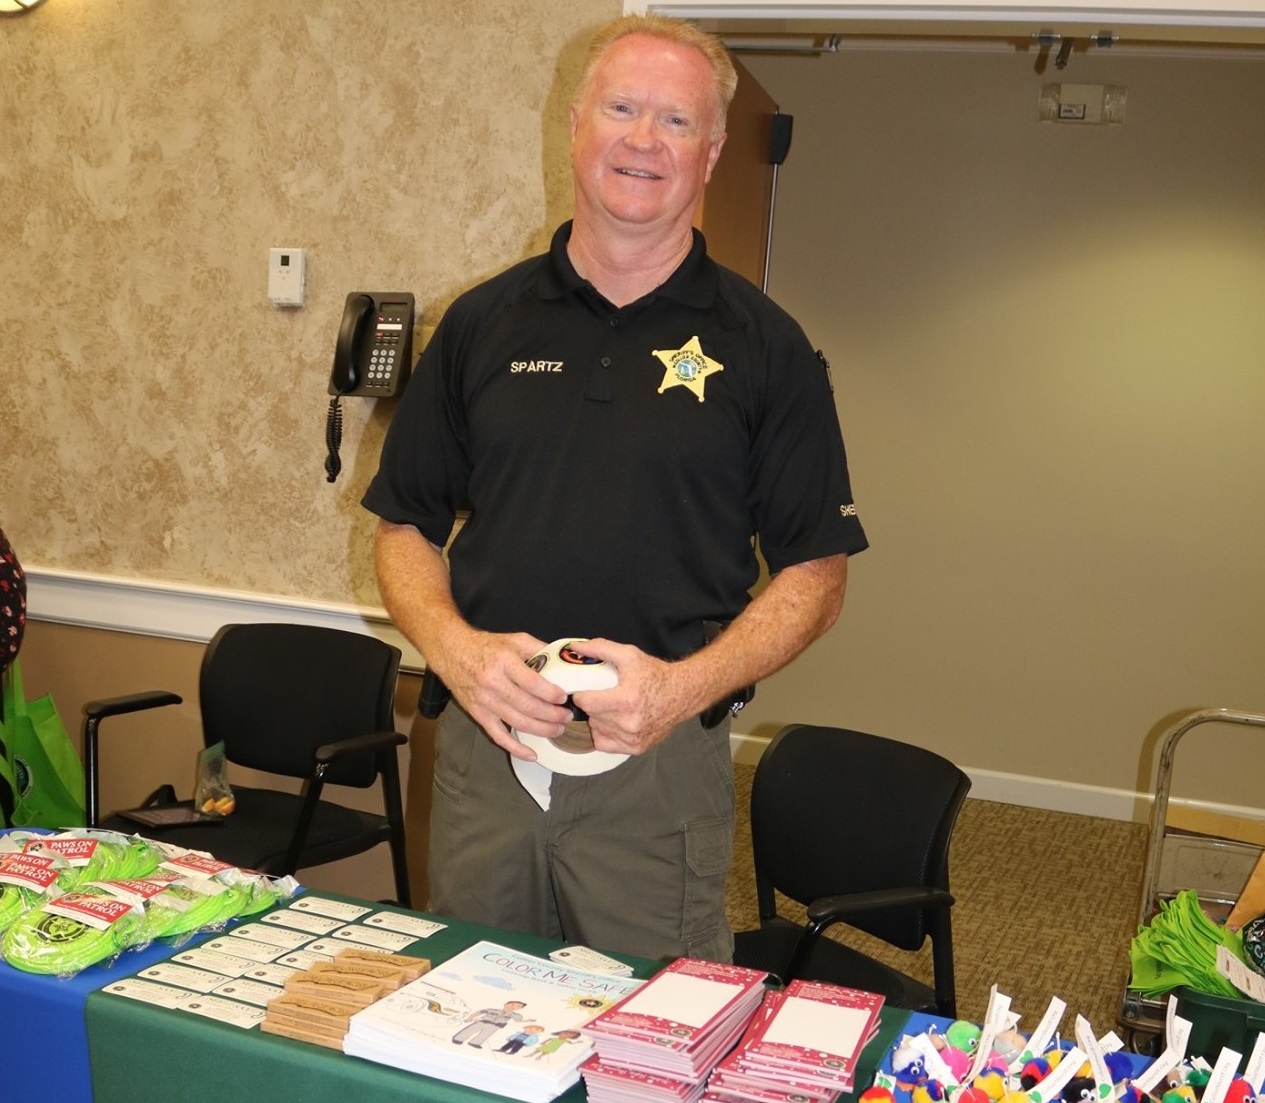 Assisting the Collier County Sherriff's Department with Child ID events